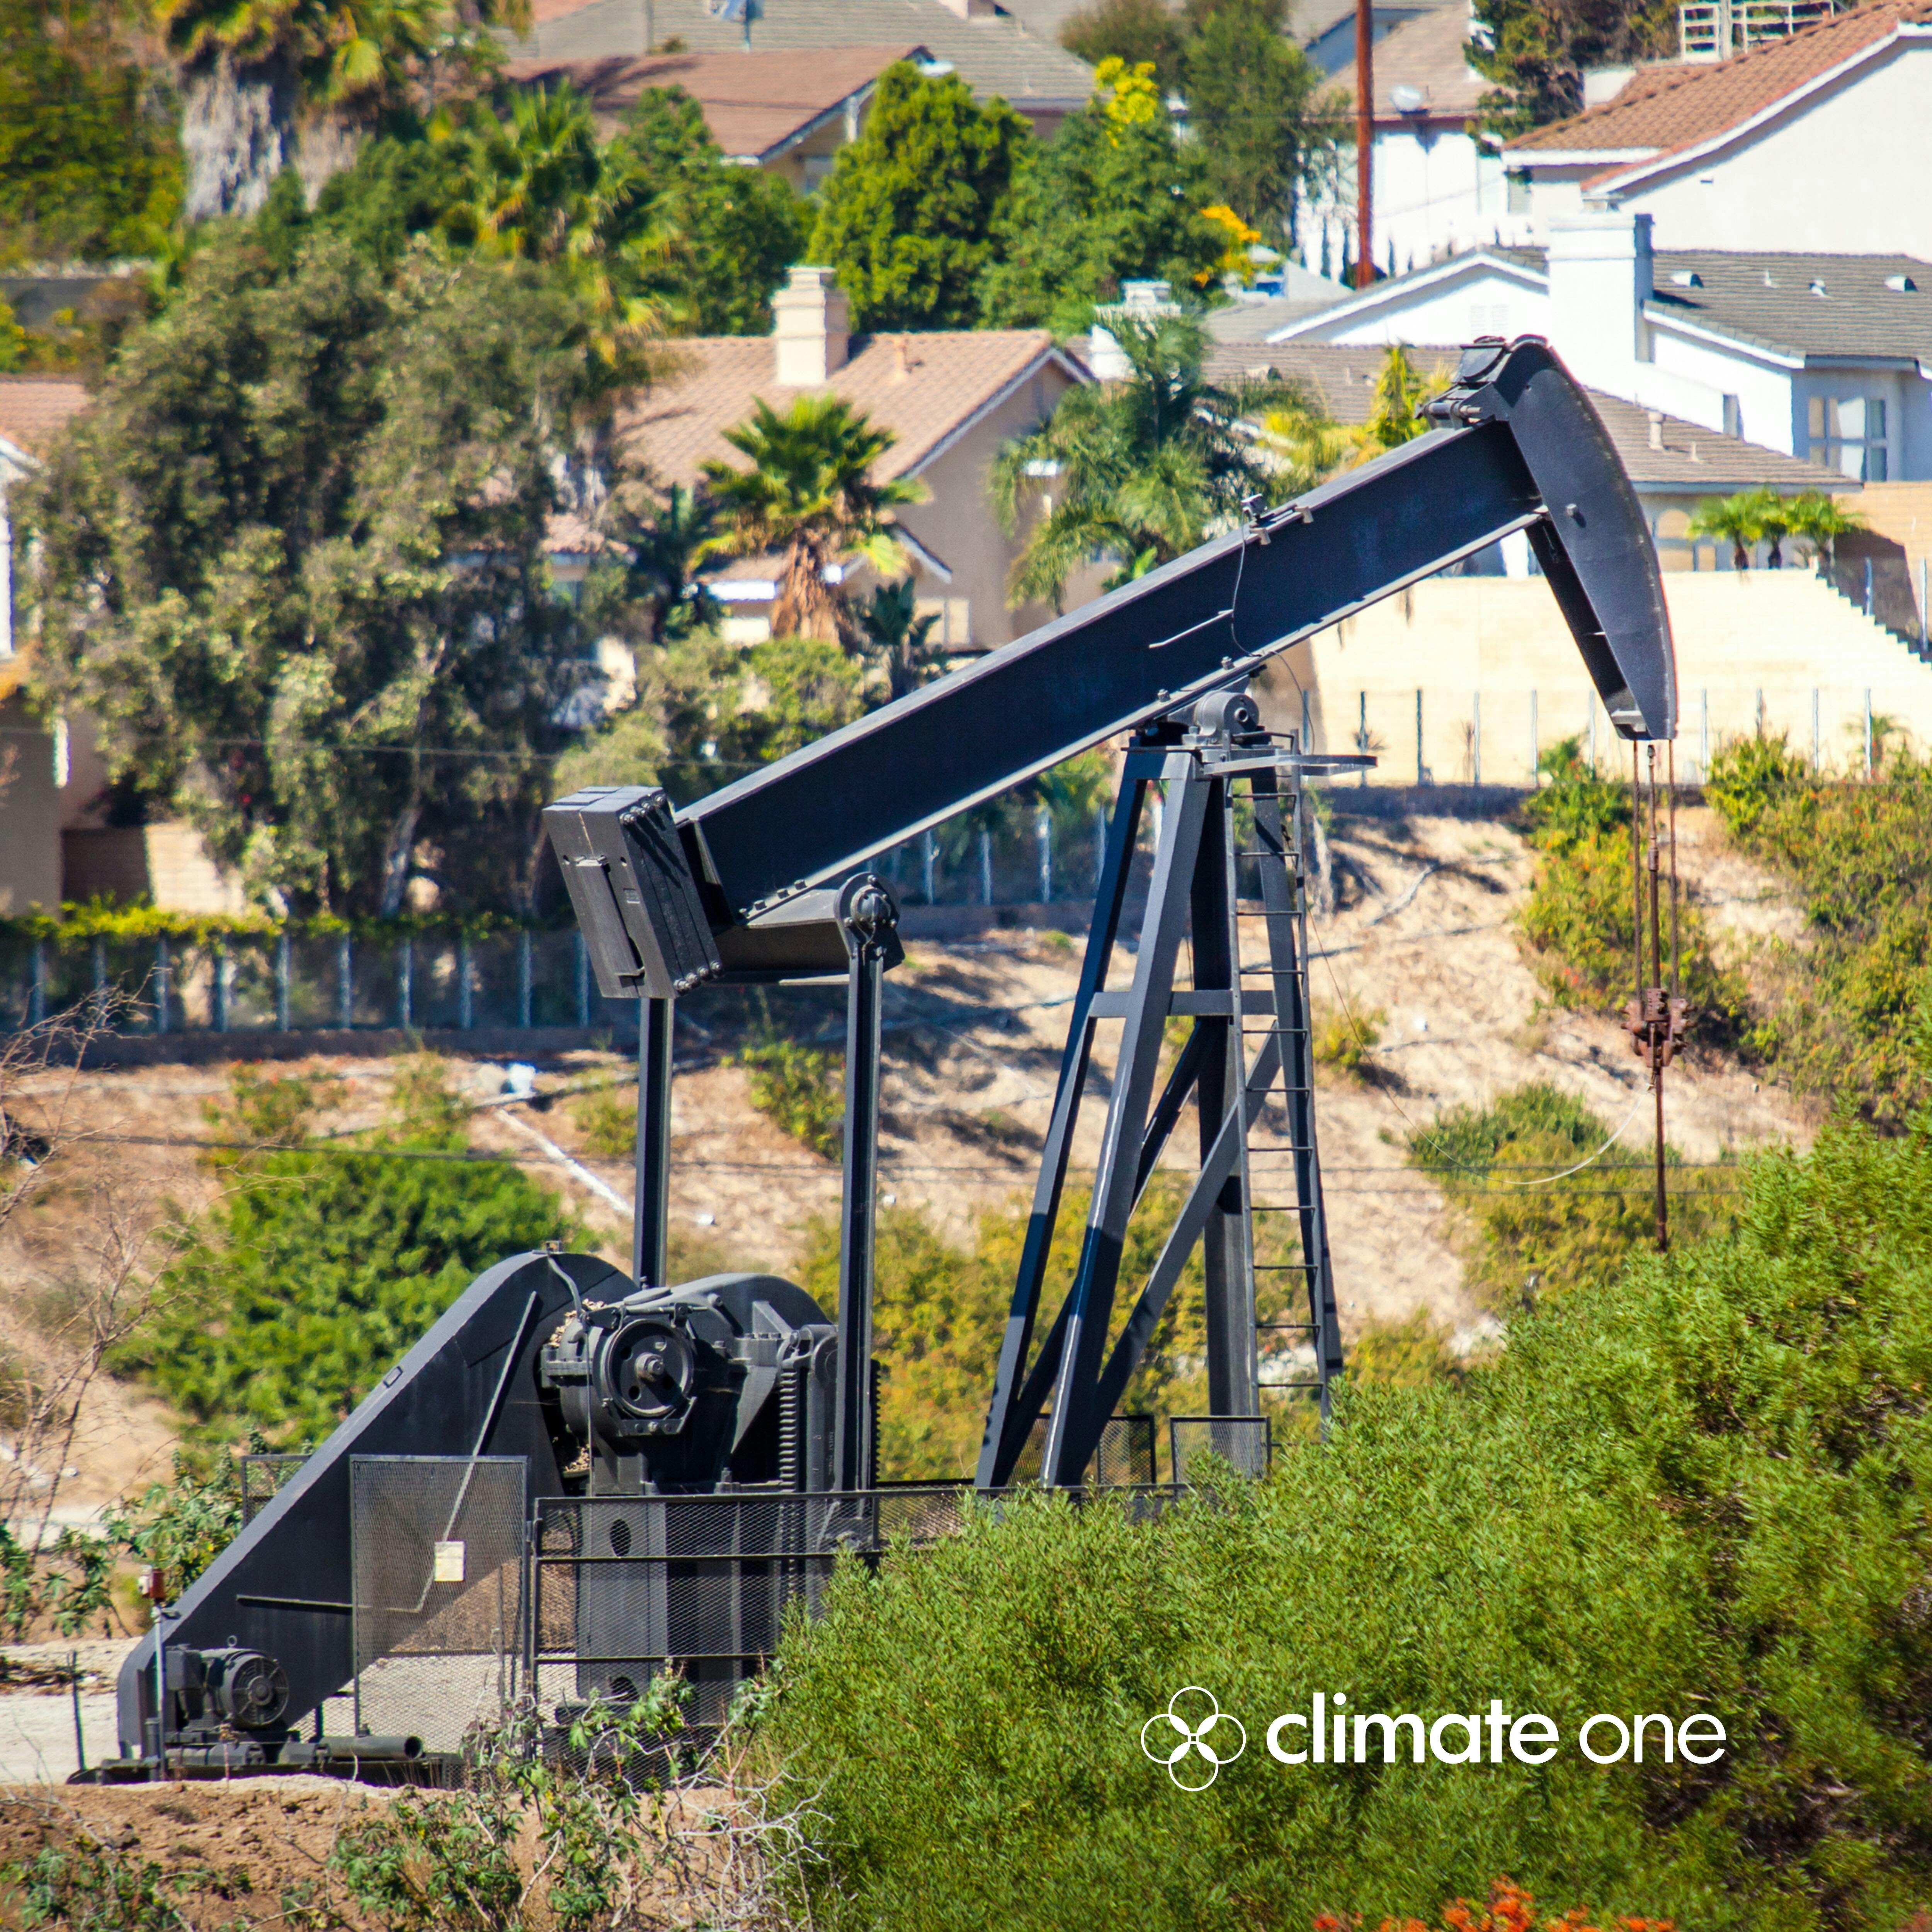 CLIMATE ONE: Fighting Fossil Fuels in the Courts and on the Ballot